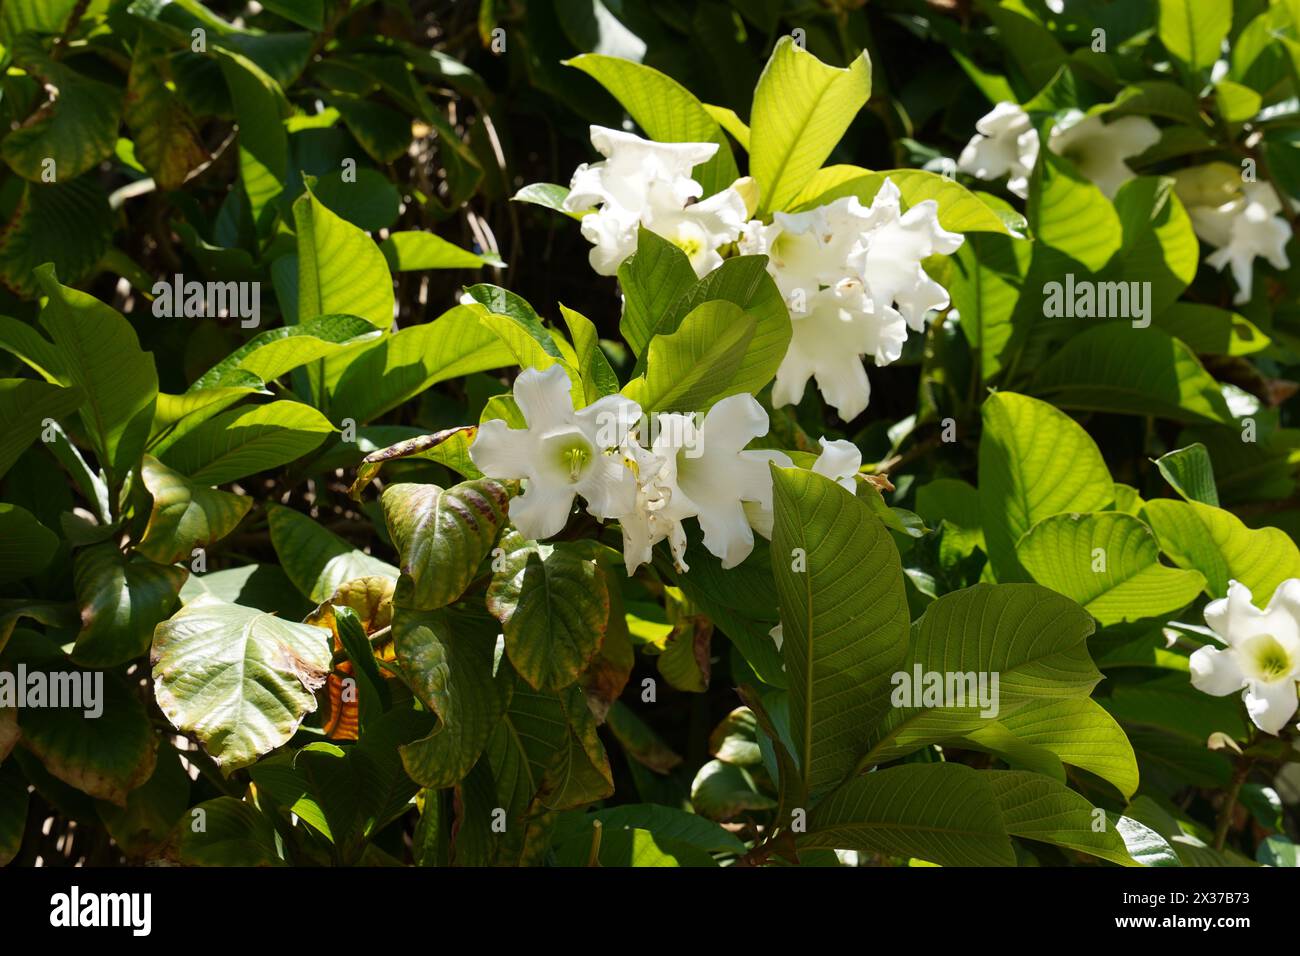 Beaumontia grandiflora, the Easter lily vine, herald's trumpet, or Nepal trumpet flower in the garden Stock Photo